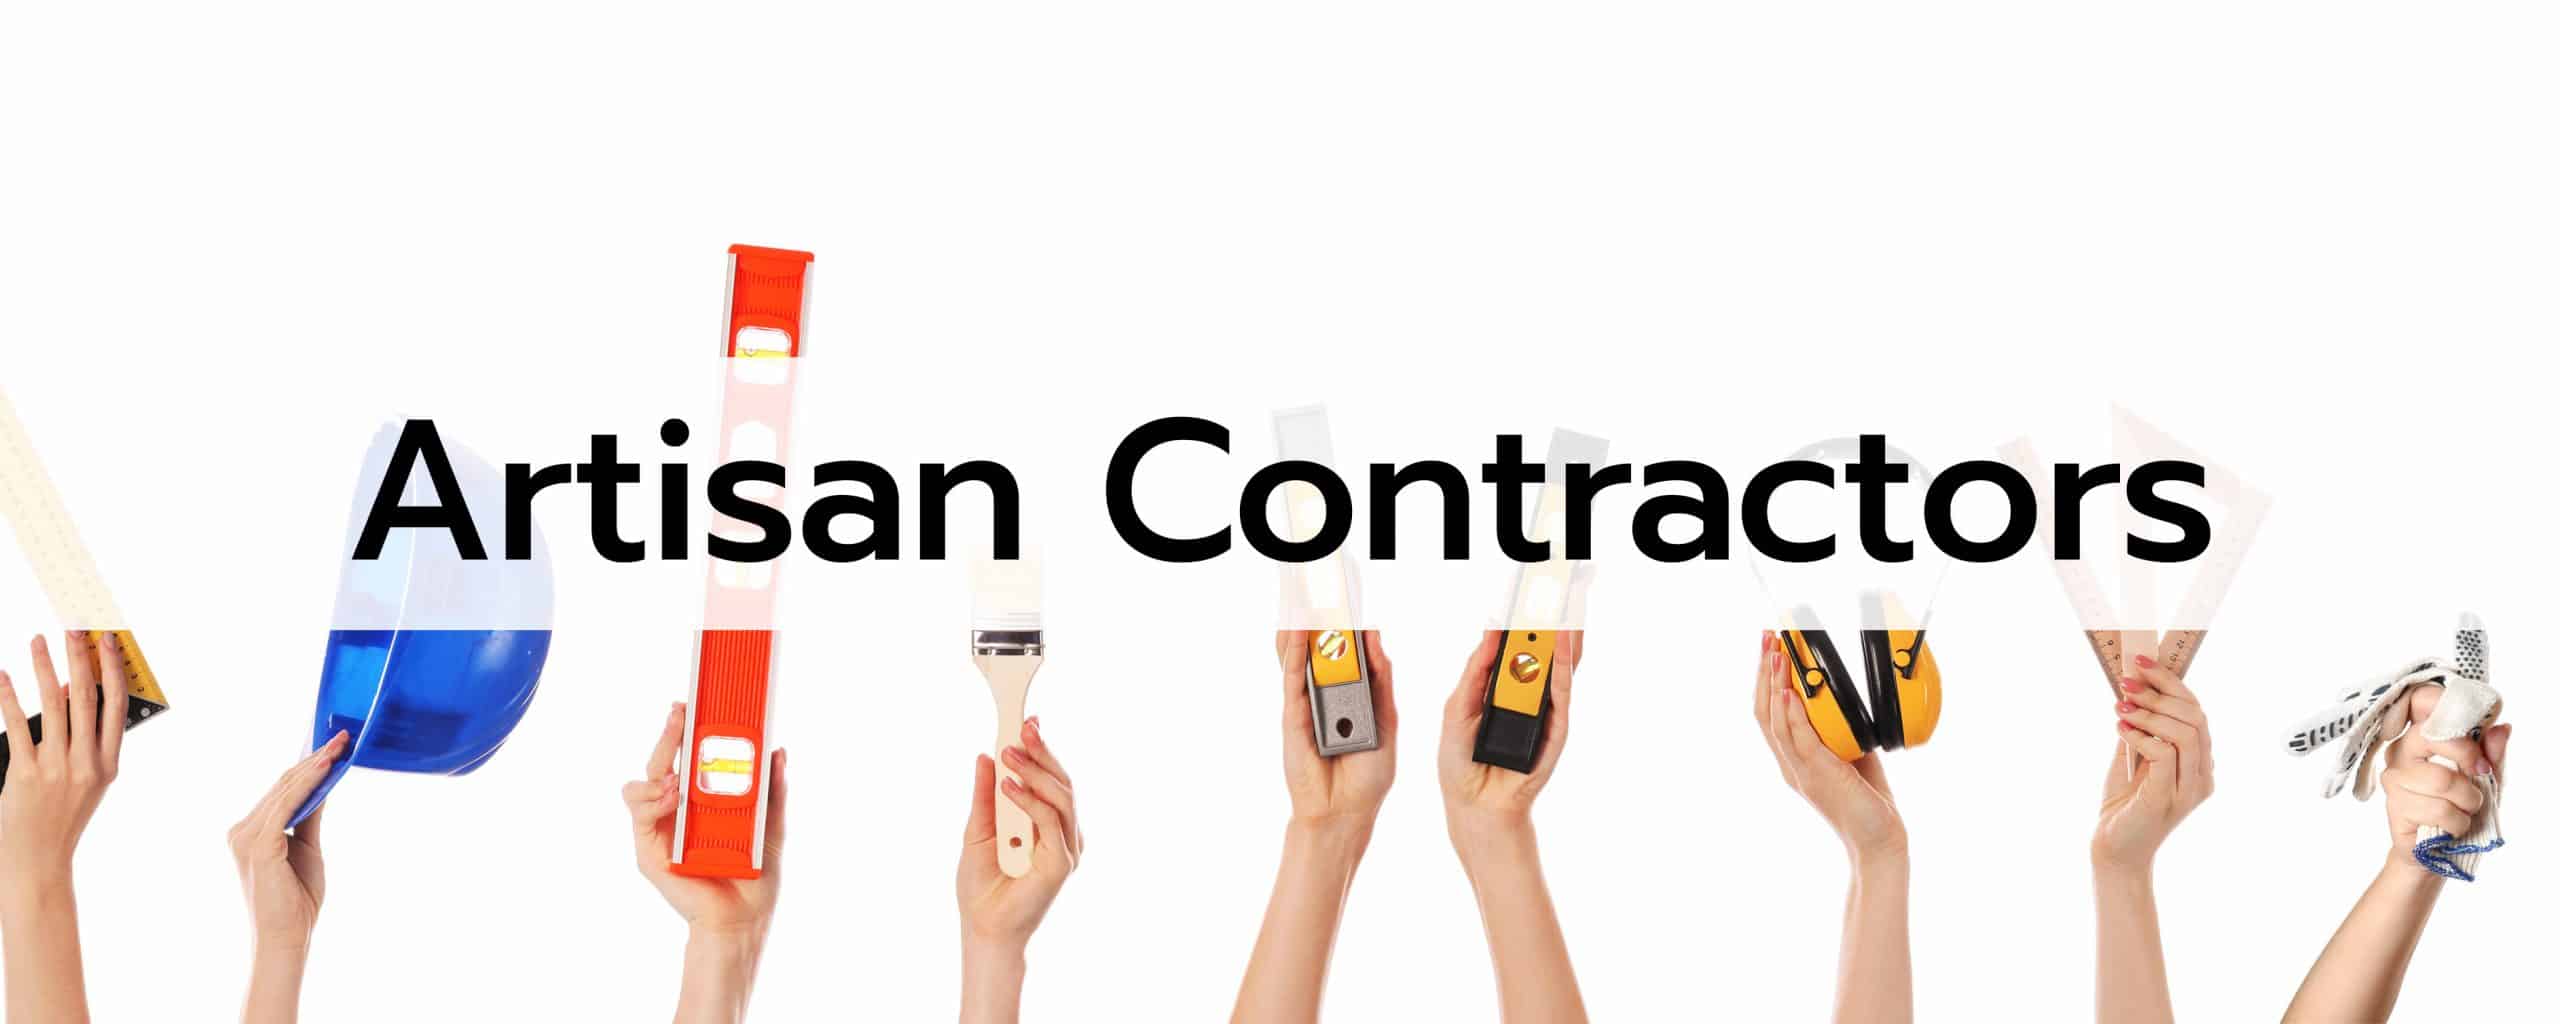 Featured image for “Artisan Contractors”